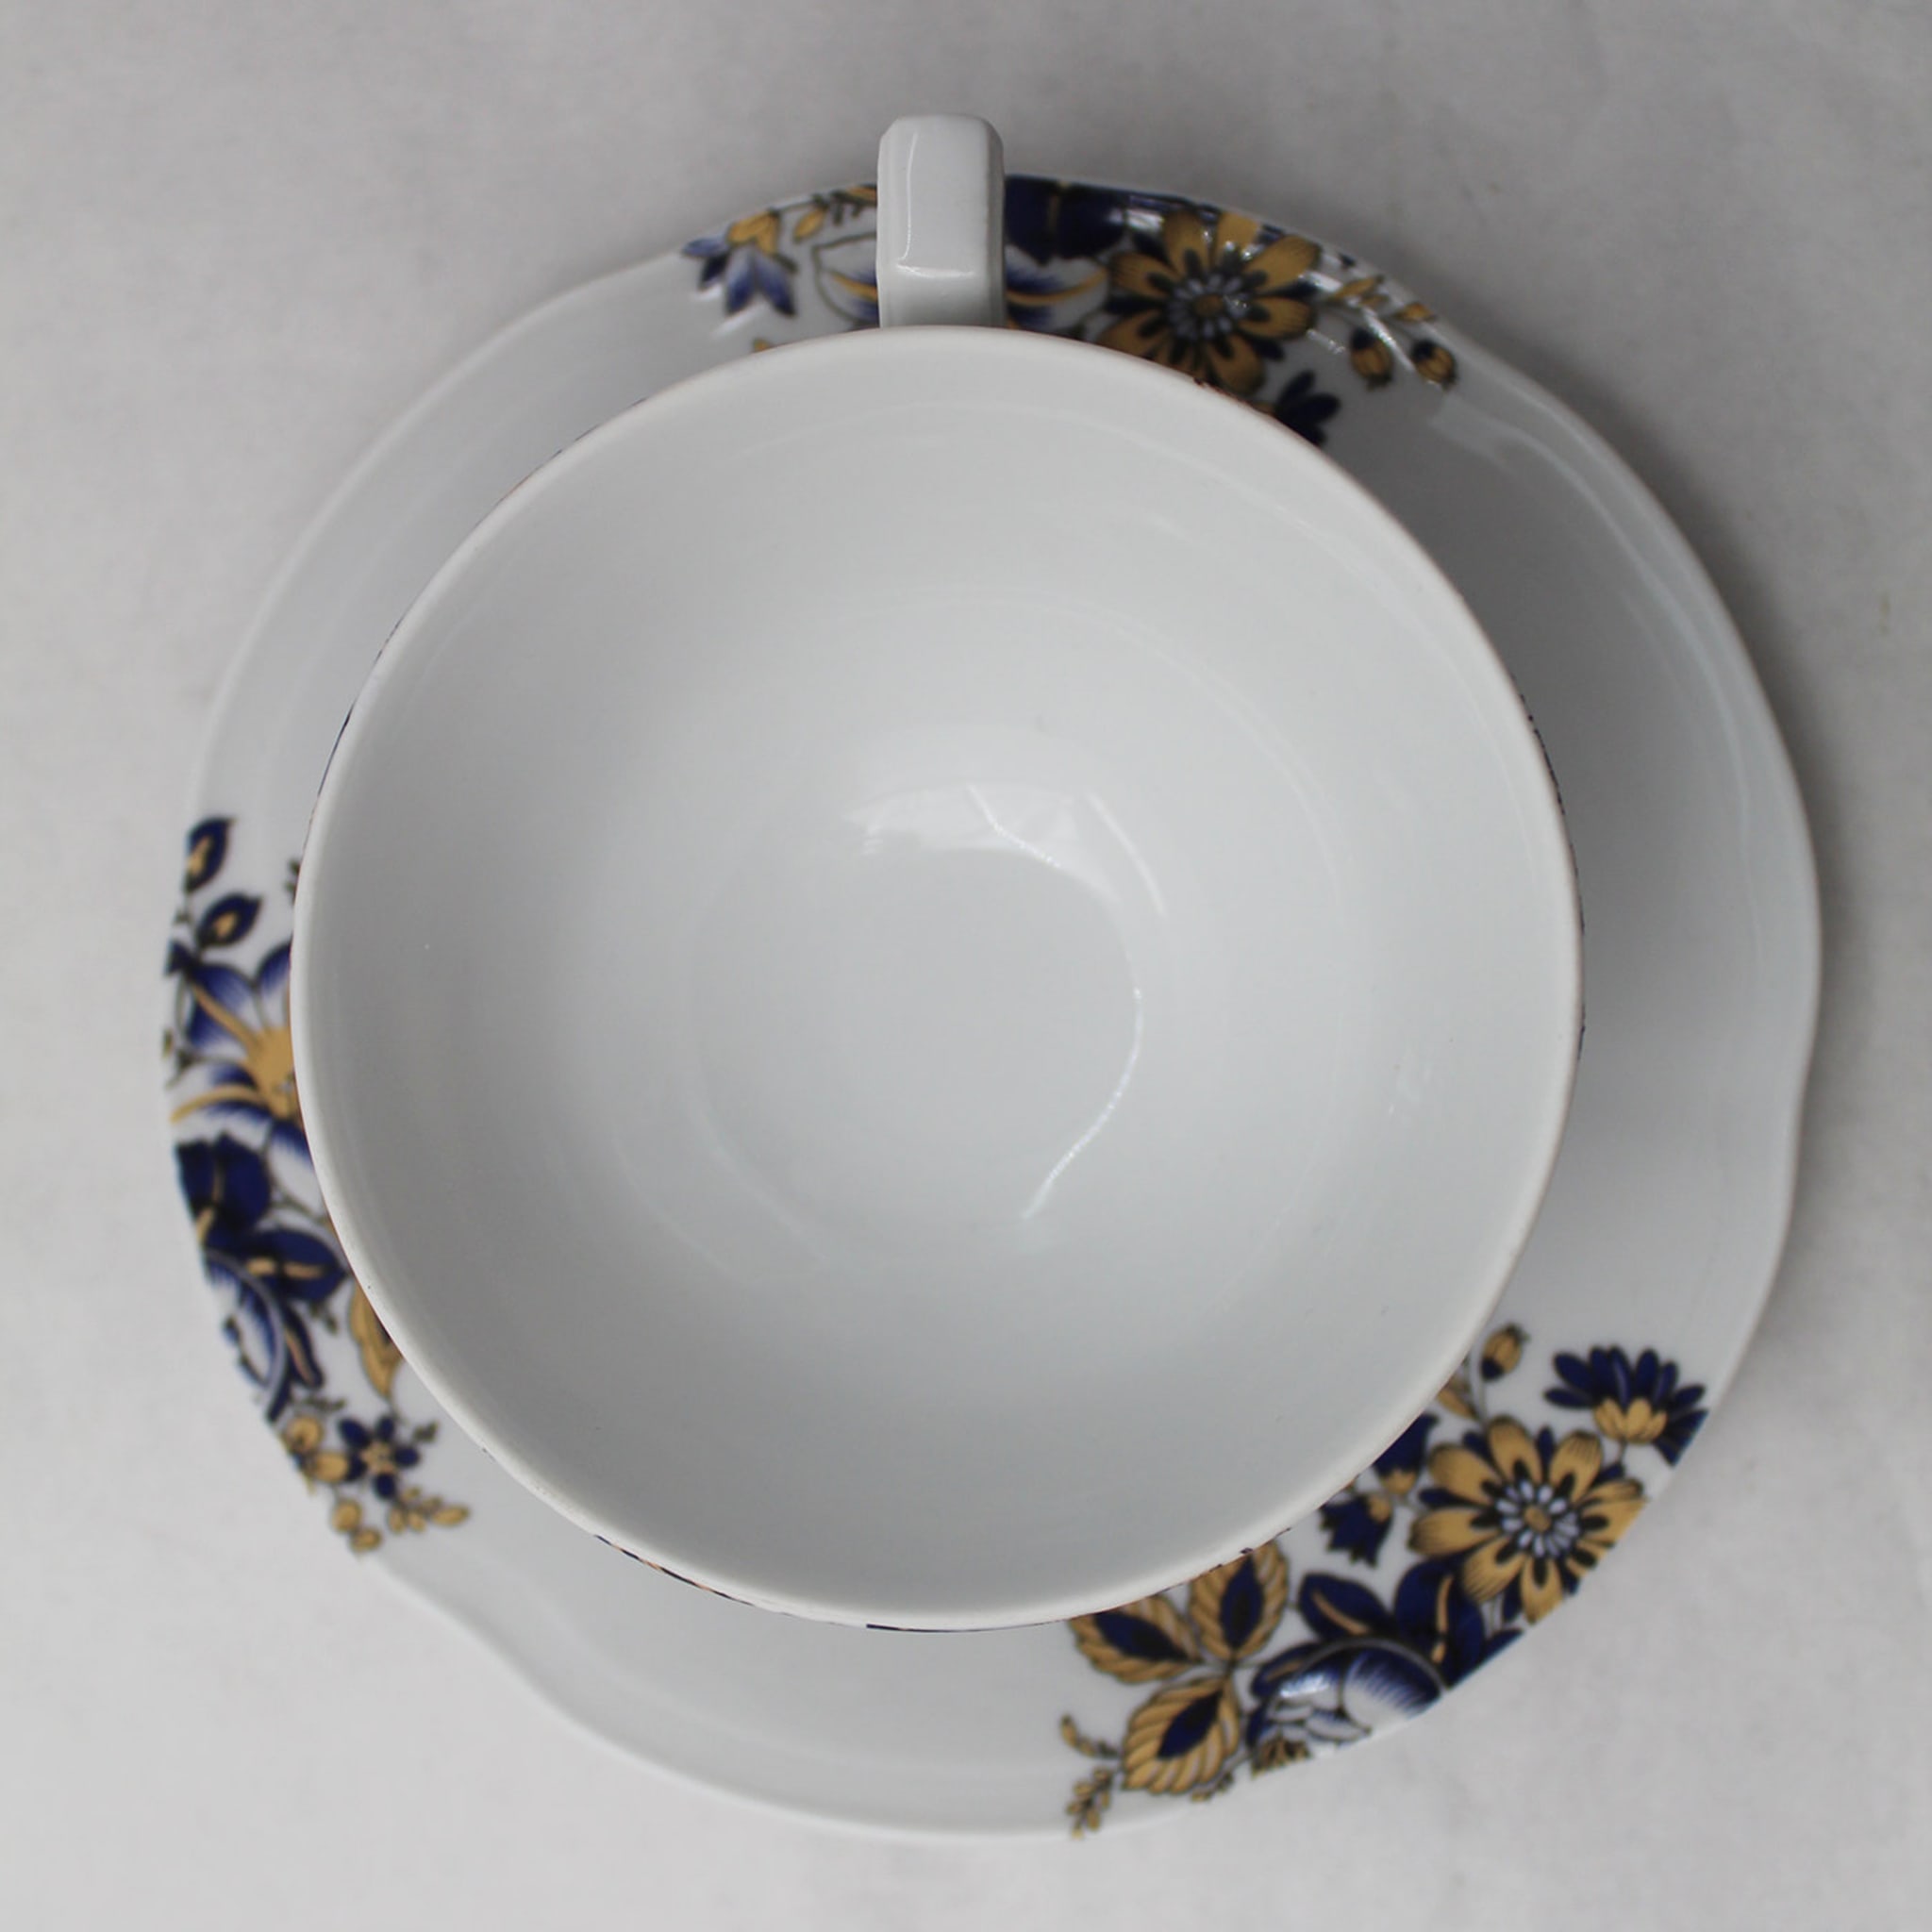 Set of 4 Rose Blue & Gold Tea Cups with Saucer - Alternative view 1